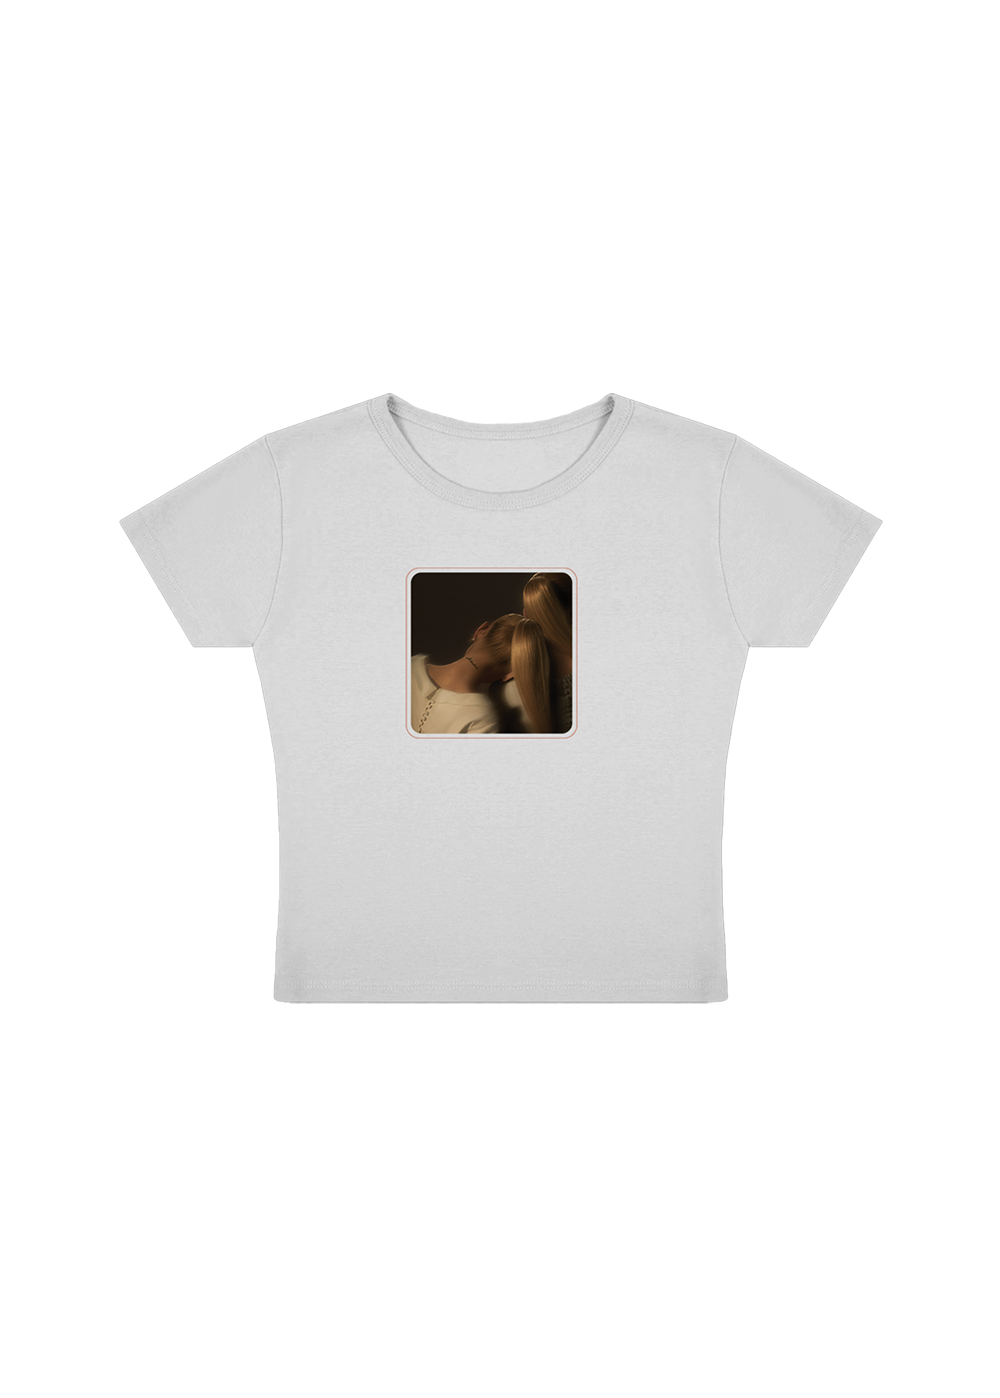 ag7 cropped white t-shirt front